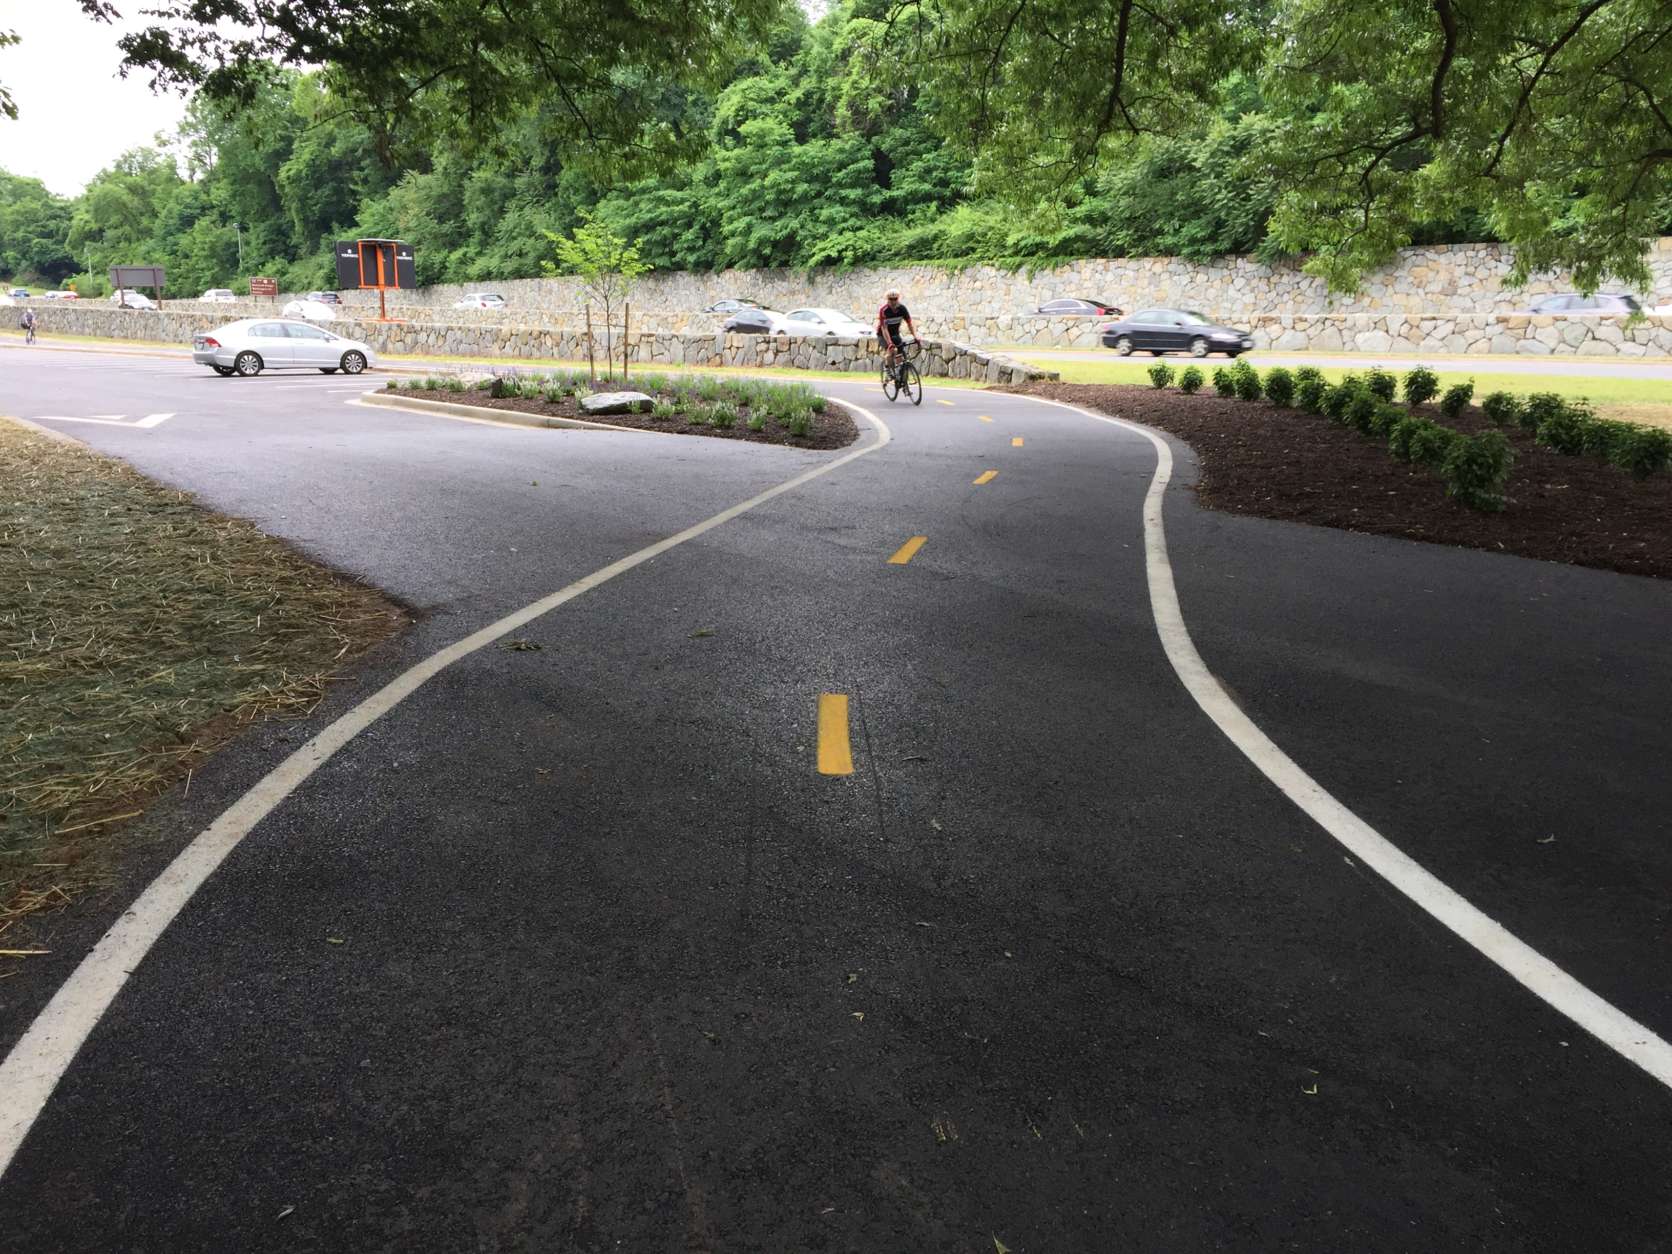 To improve safety, the Mount Vernon Trail has been realigned and raised where it crosses the parking lot at Theodore Roosevelt Island. (WTOP/Michelle Basch)